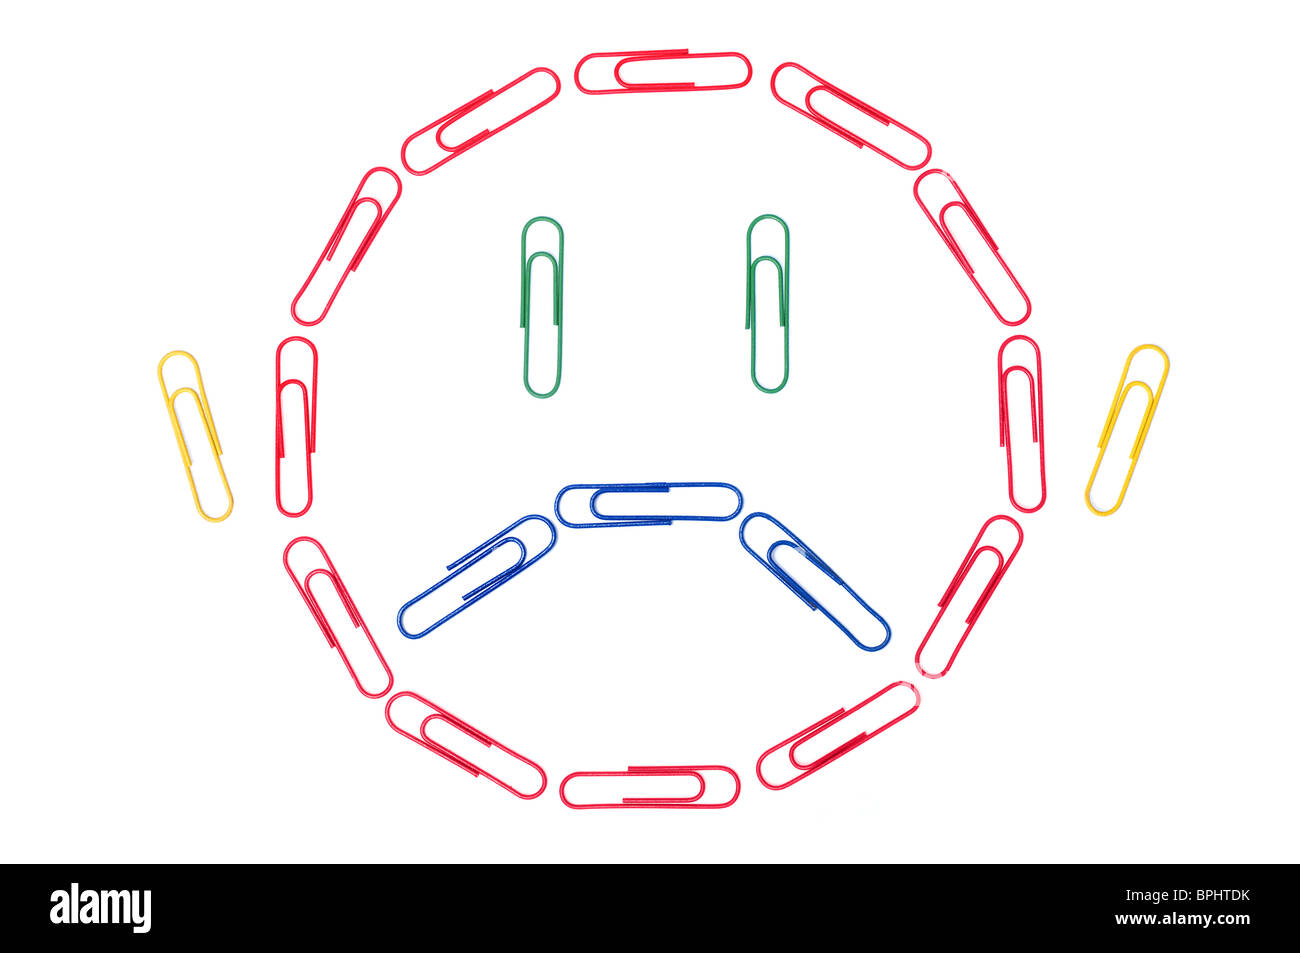 Office emoticon - sad face made up of paper clips. Stock Photo